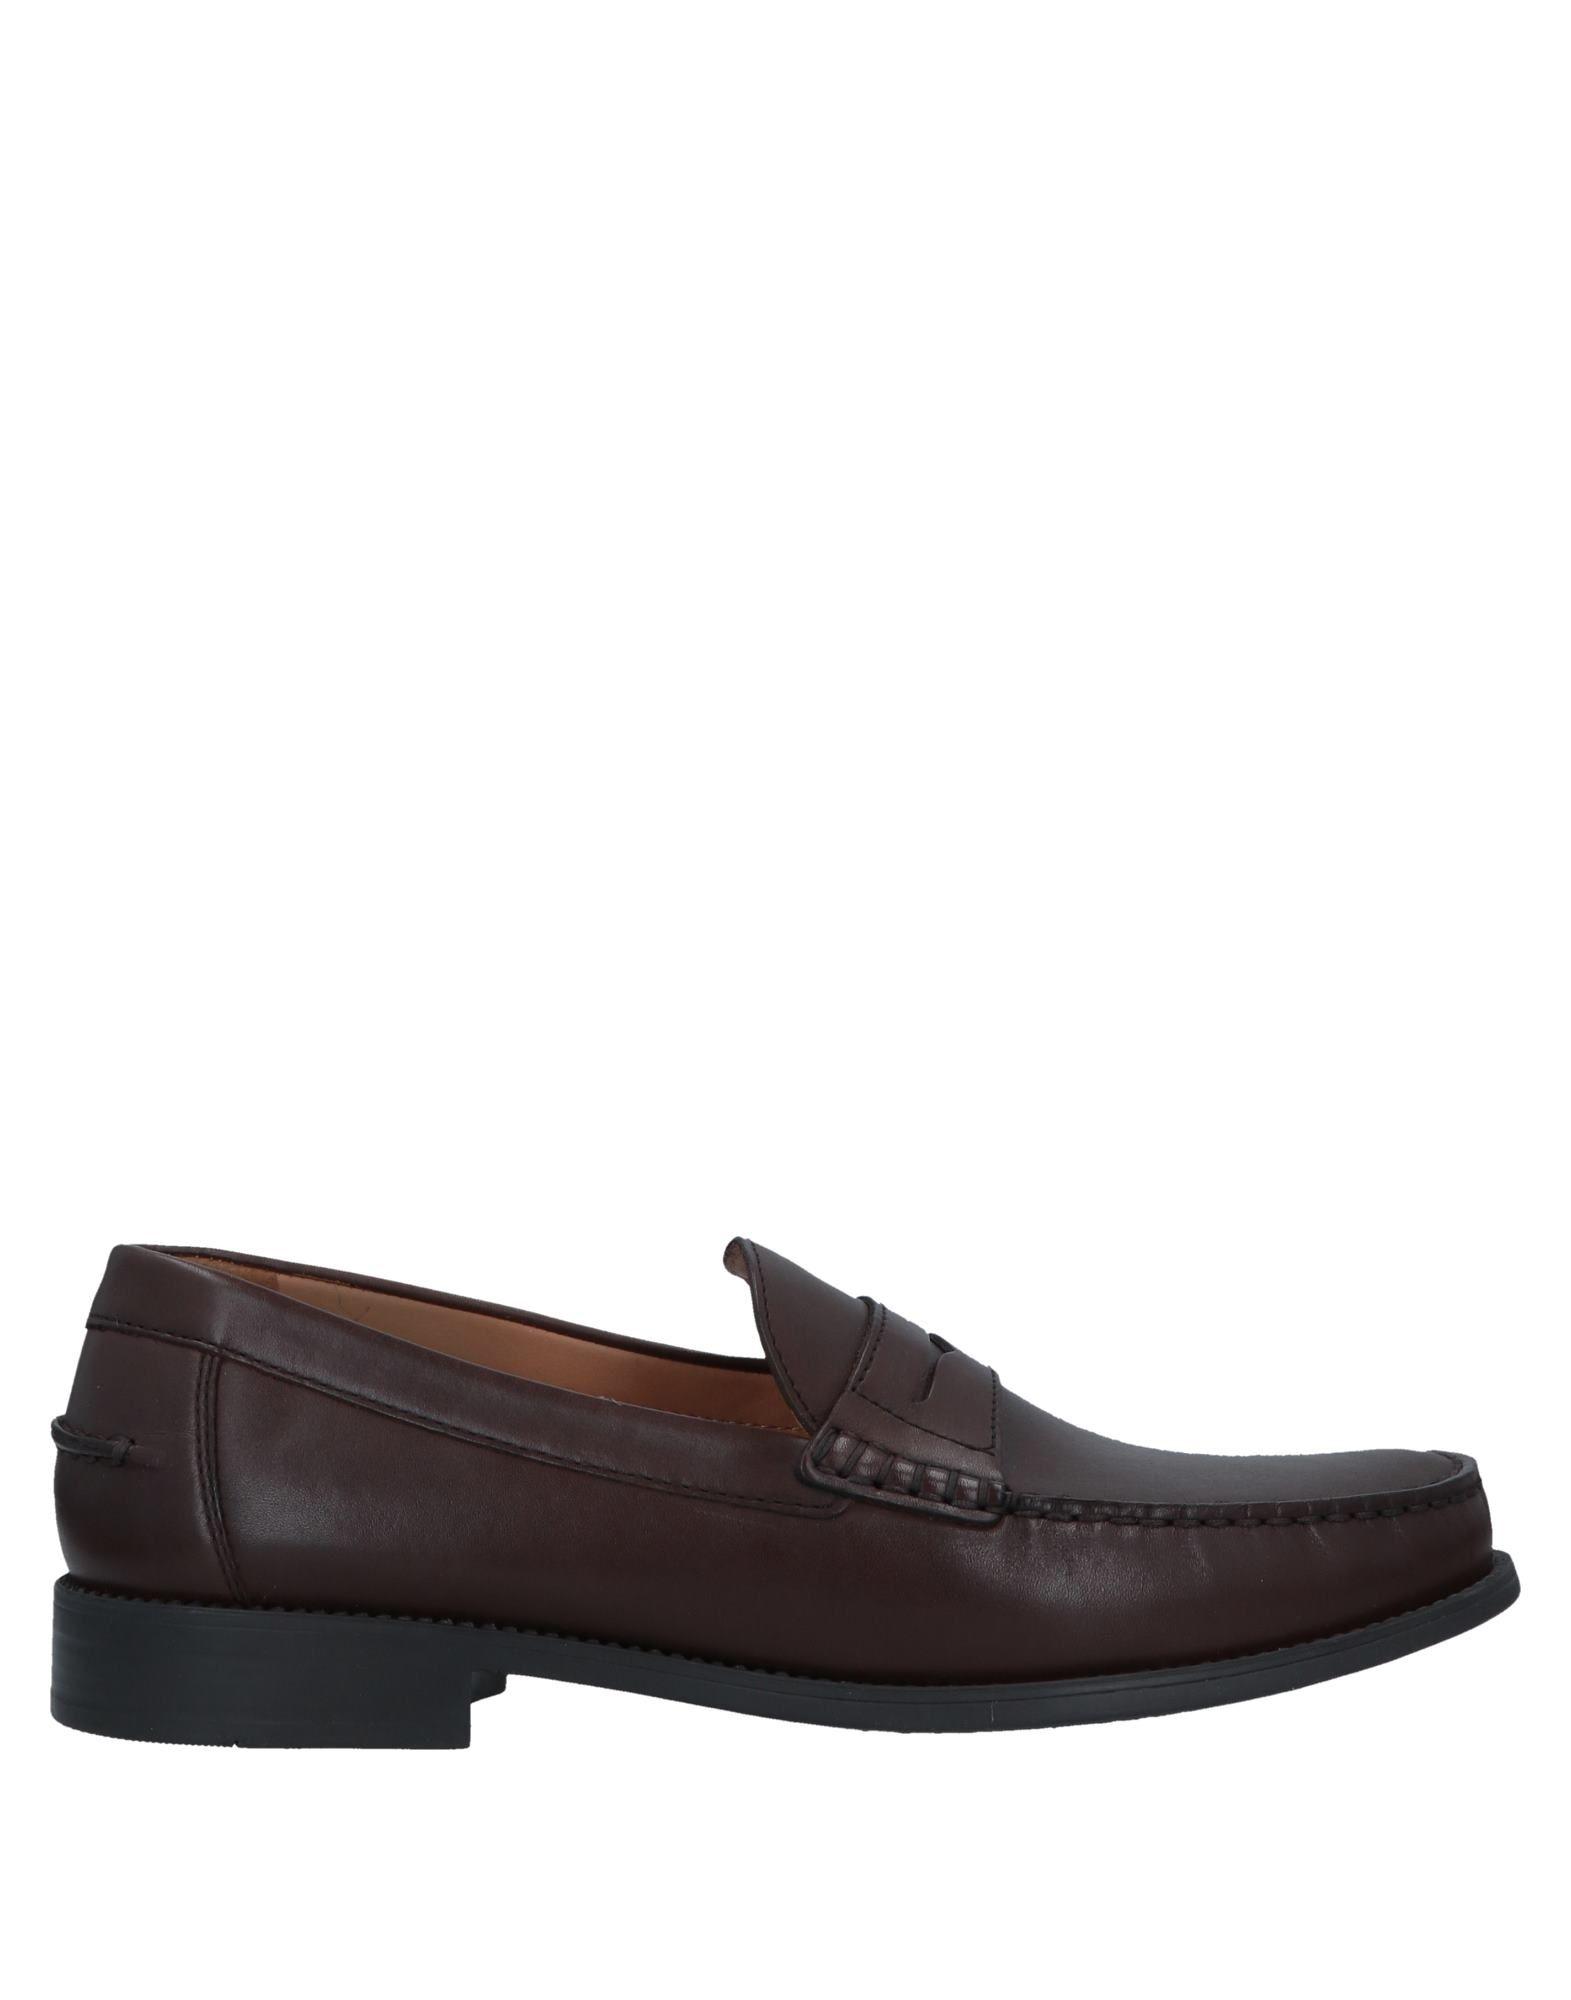 Geox Leather Loafer in Brown for Men - Lyst